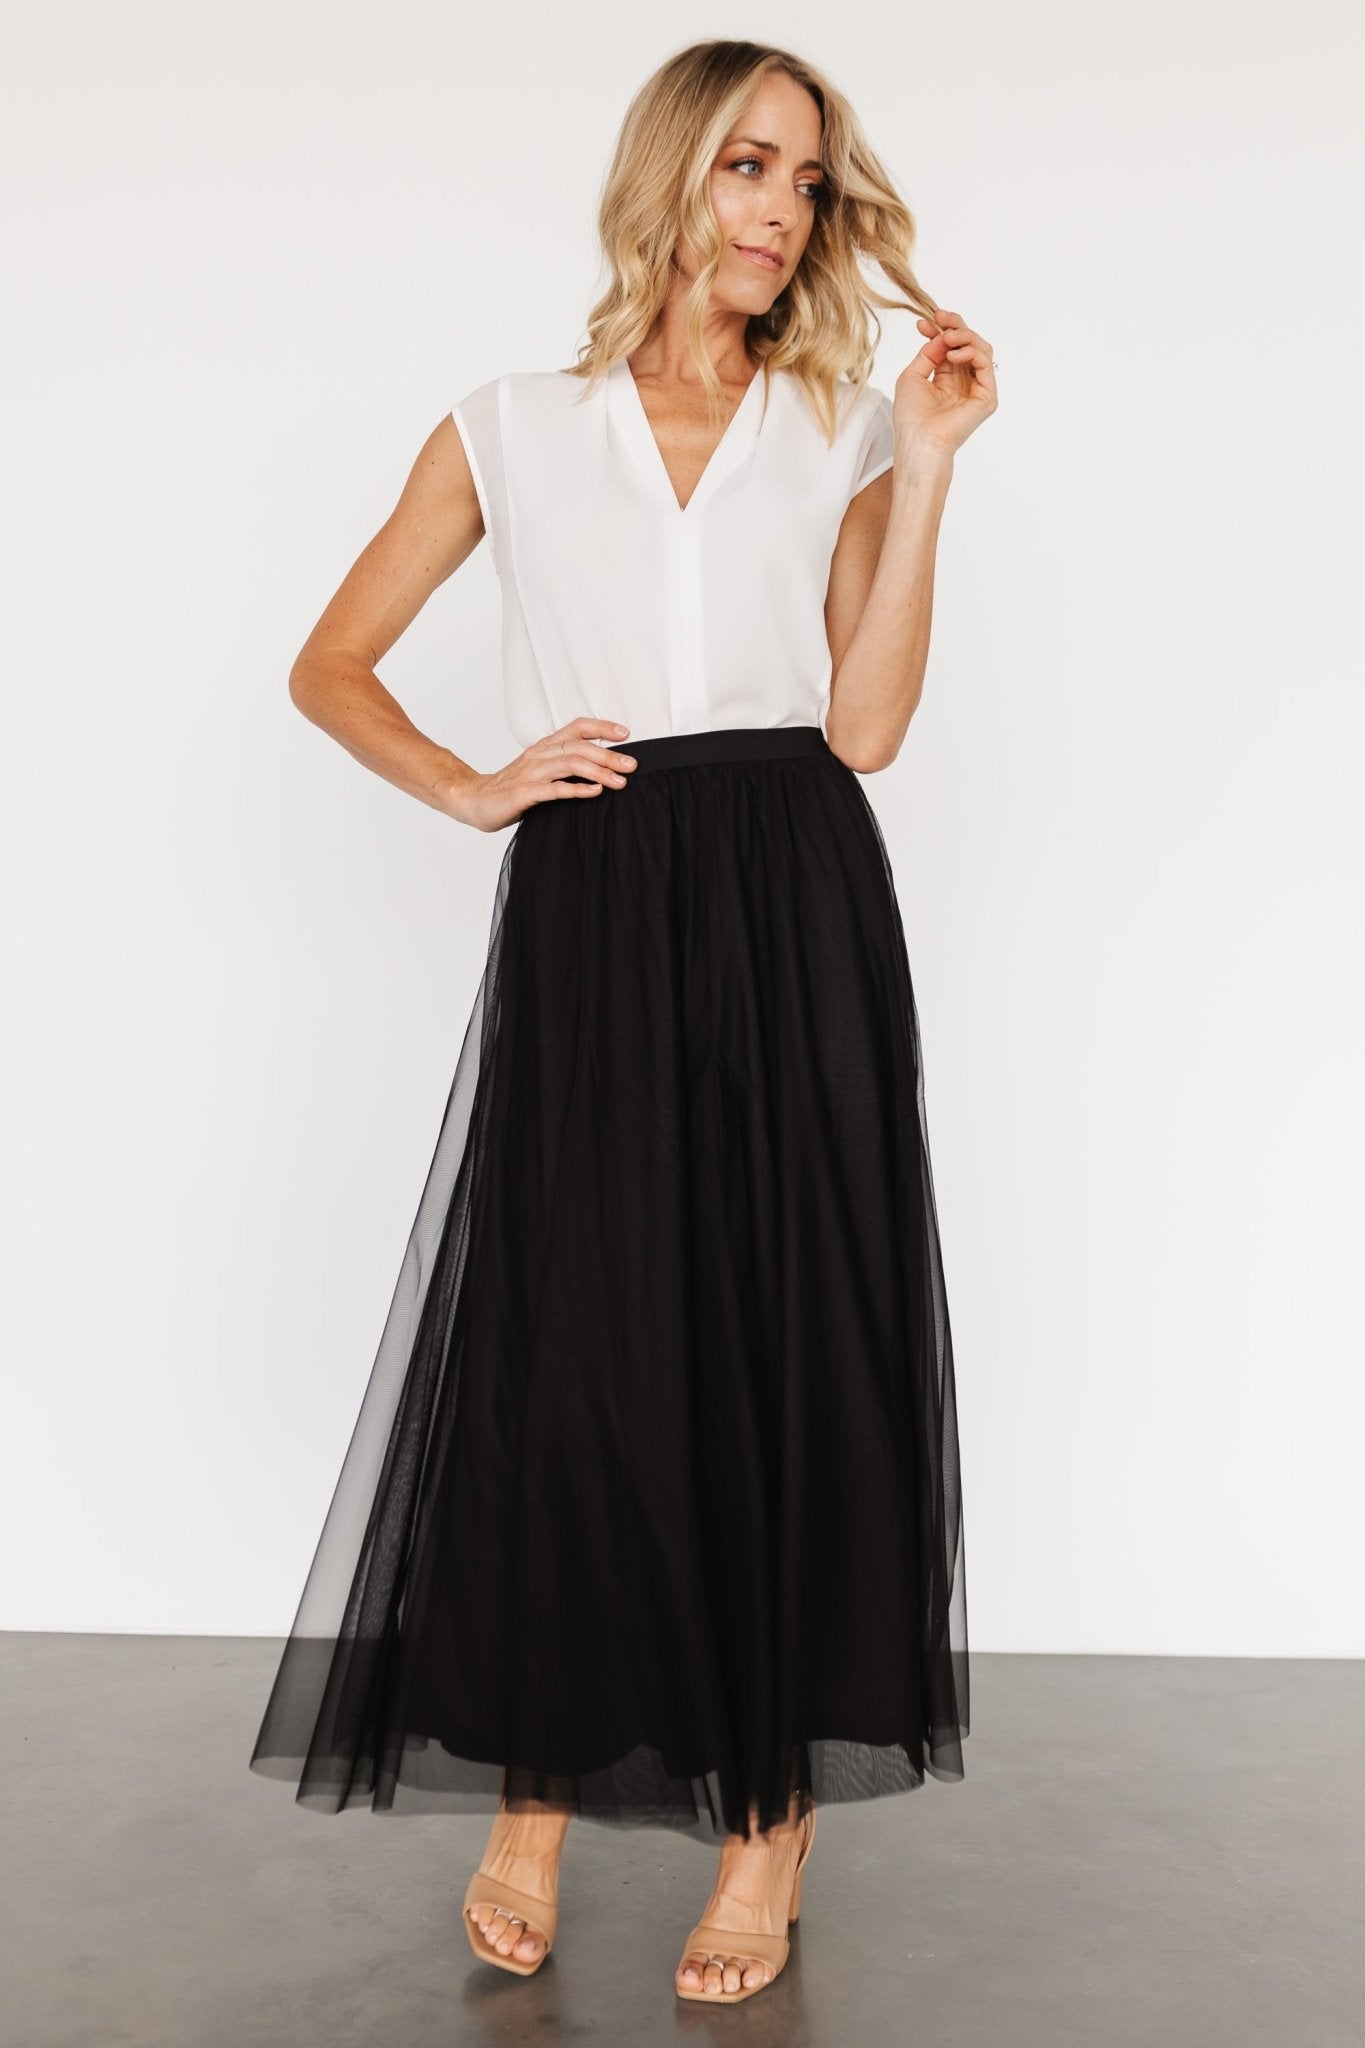 Accessorizing Your Black Tulle Skirt